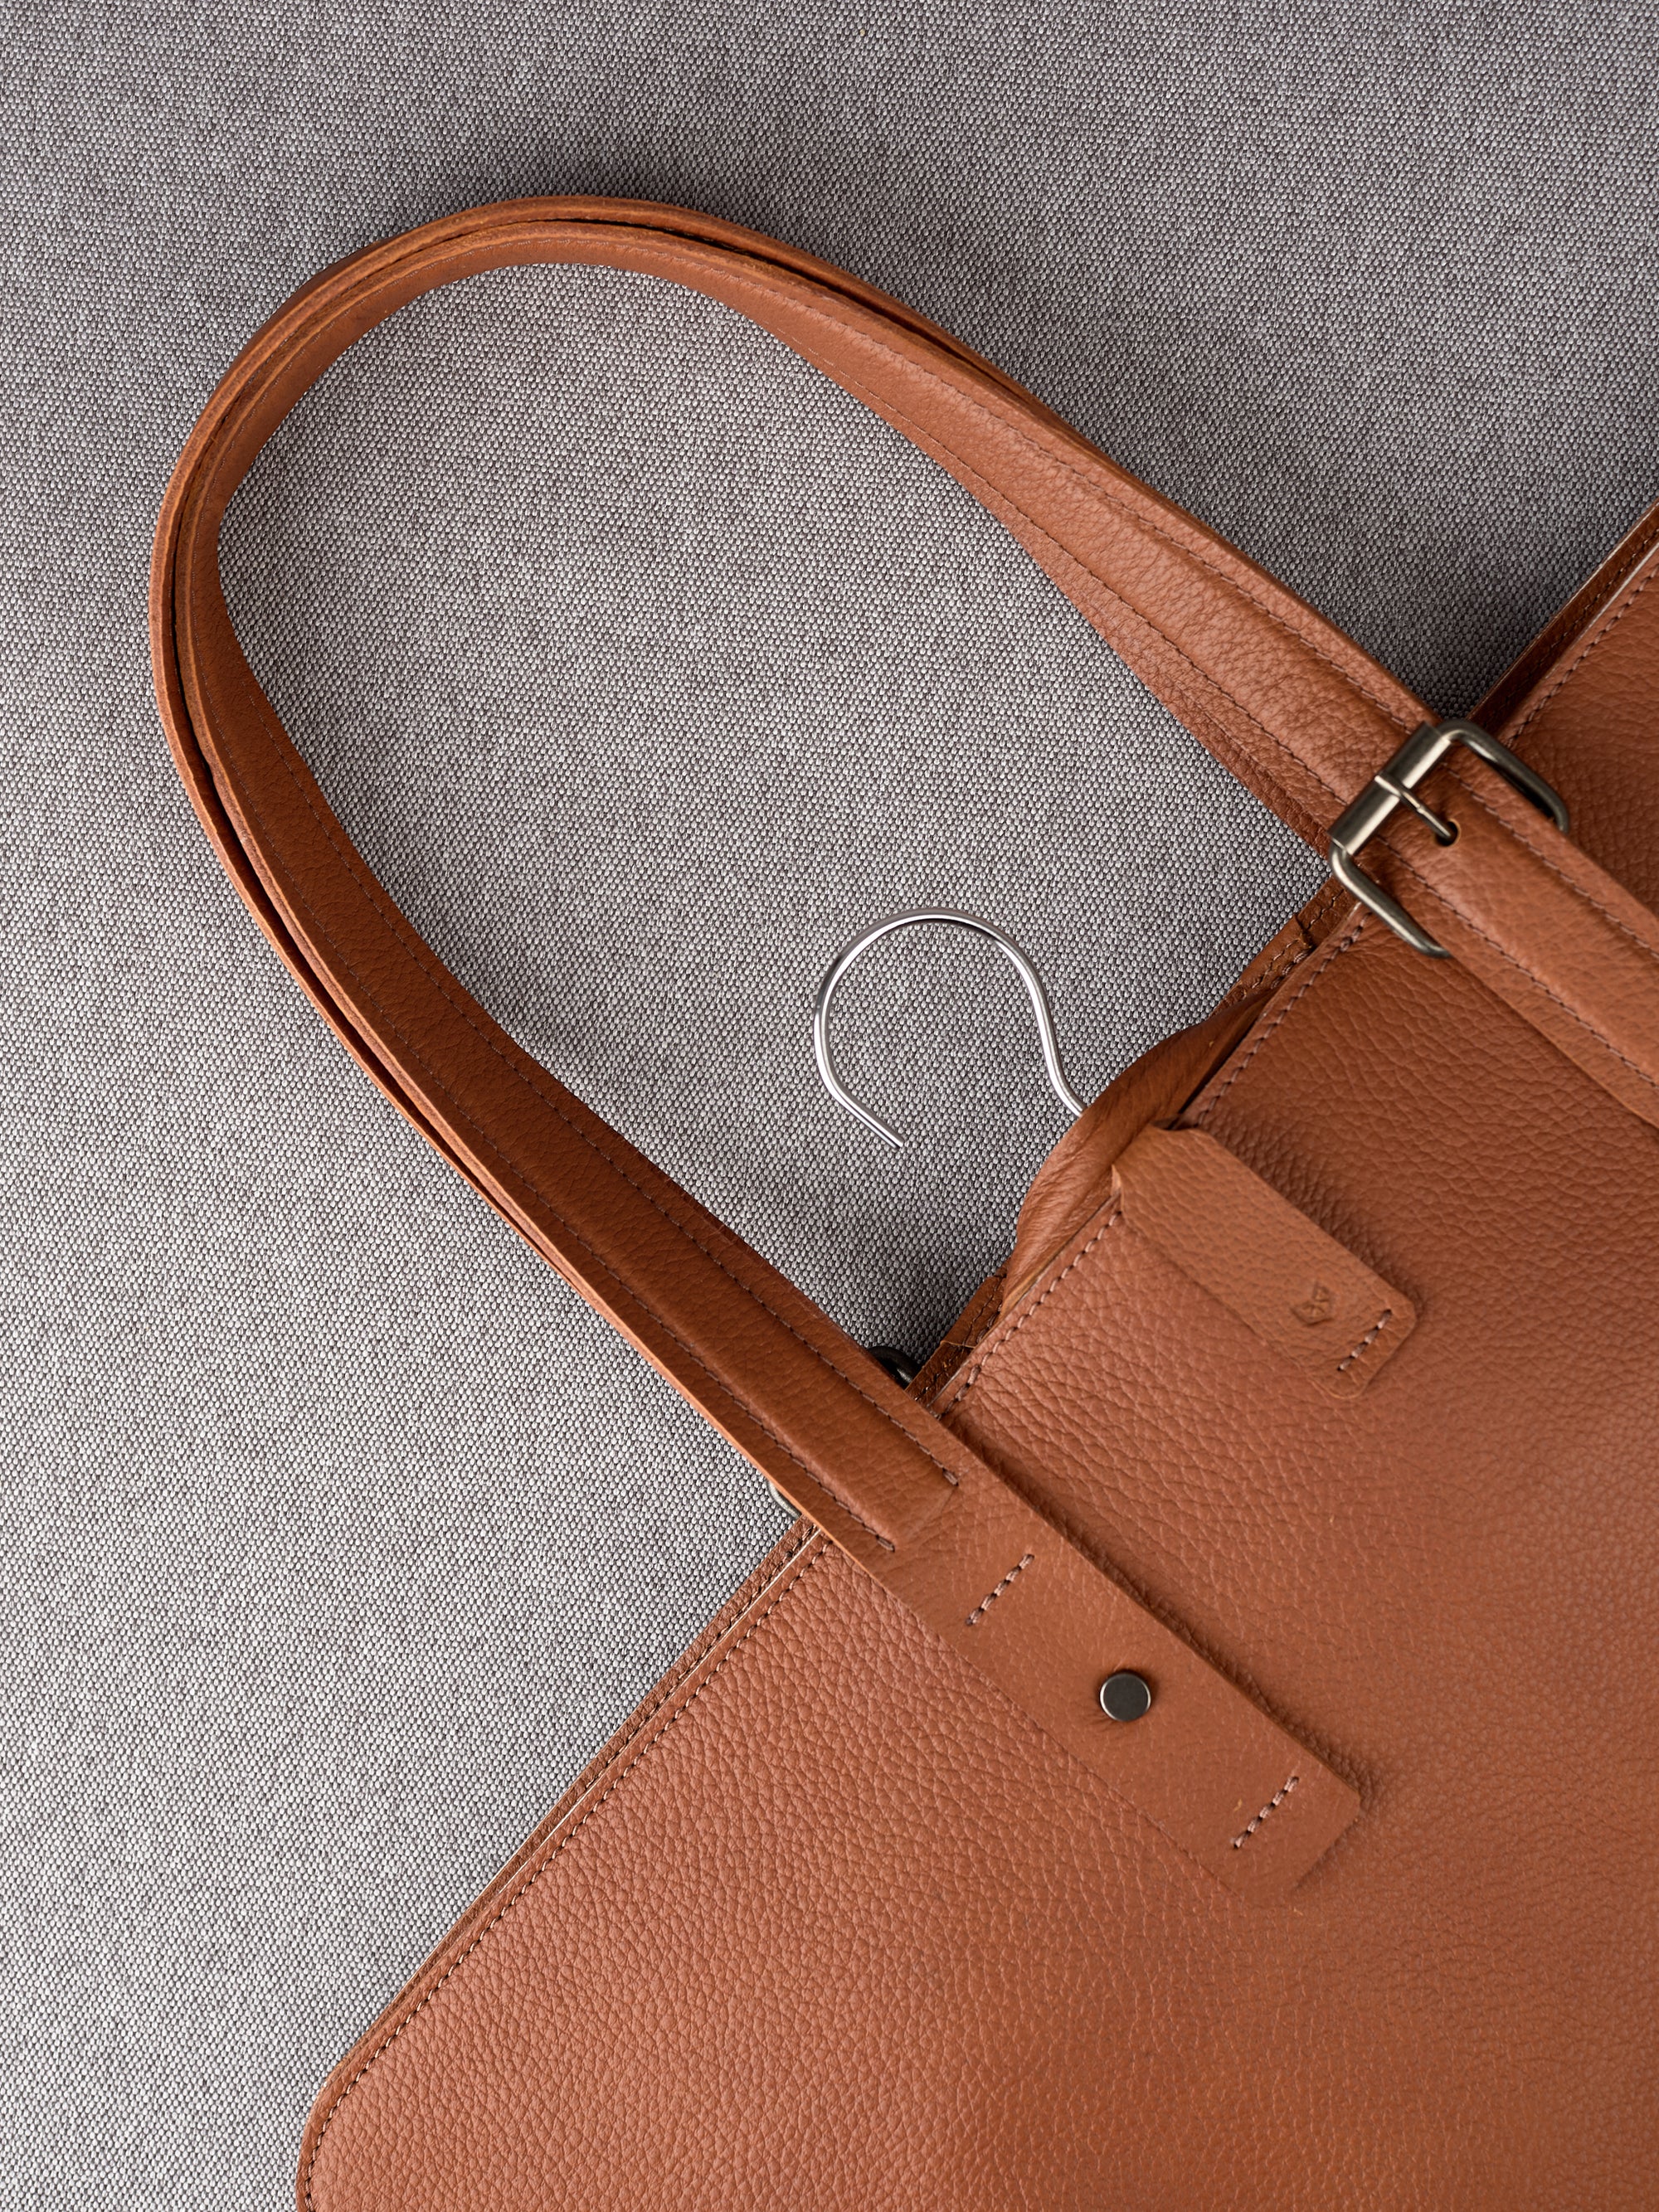 Leather Handles. Suit Travel Bag Carry On Tan by Capra